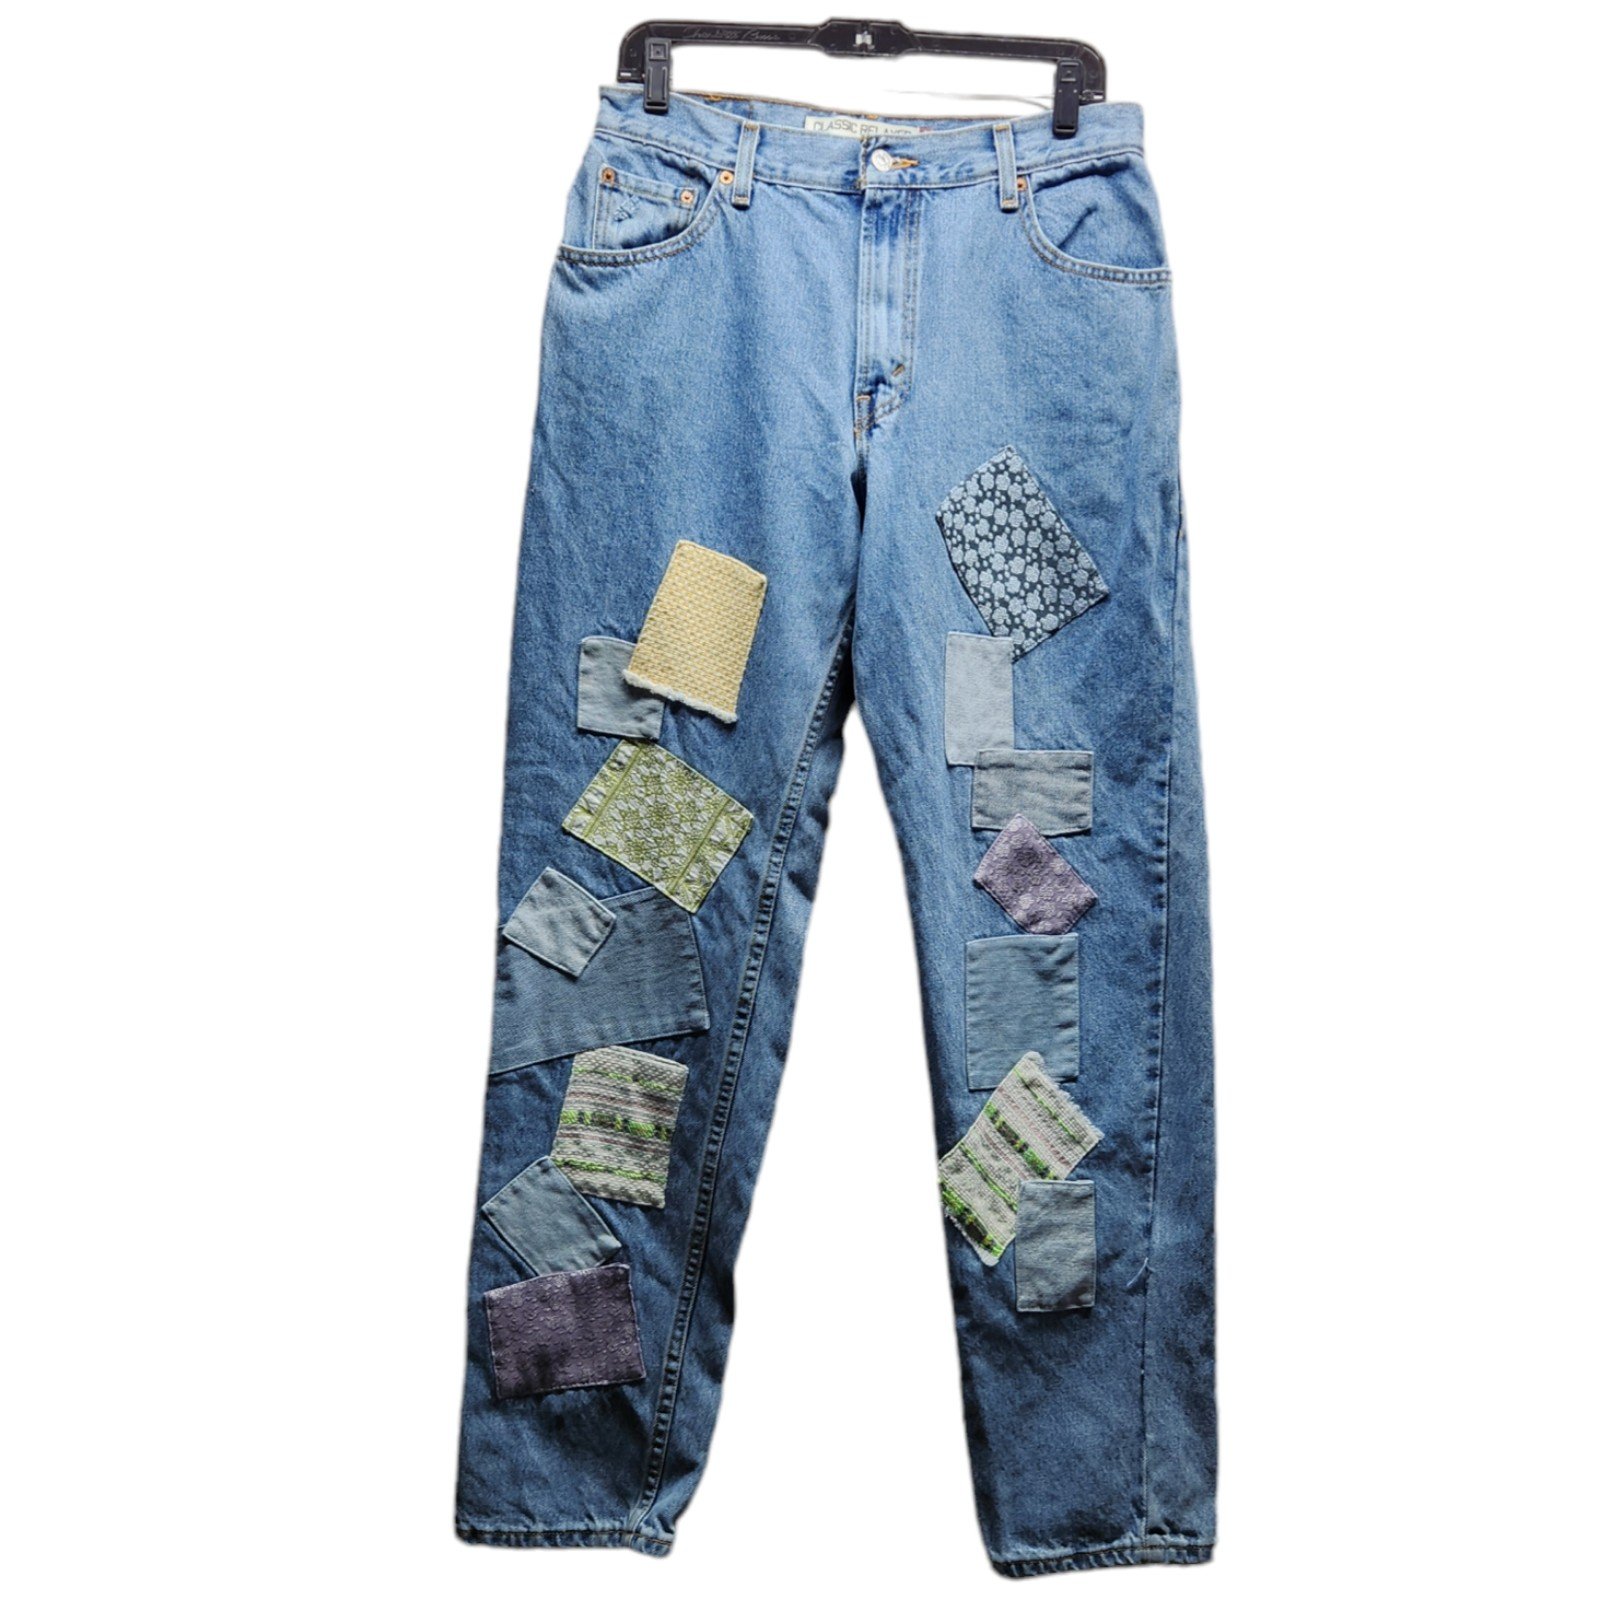 high discount Levi´s 550 Patchwork Jeans Womens Size 12L Classic Relaxed Tapered Fit Vintage ktTcNwC2e New Style